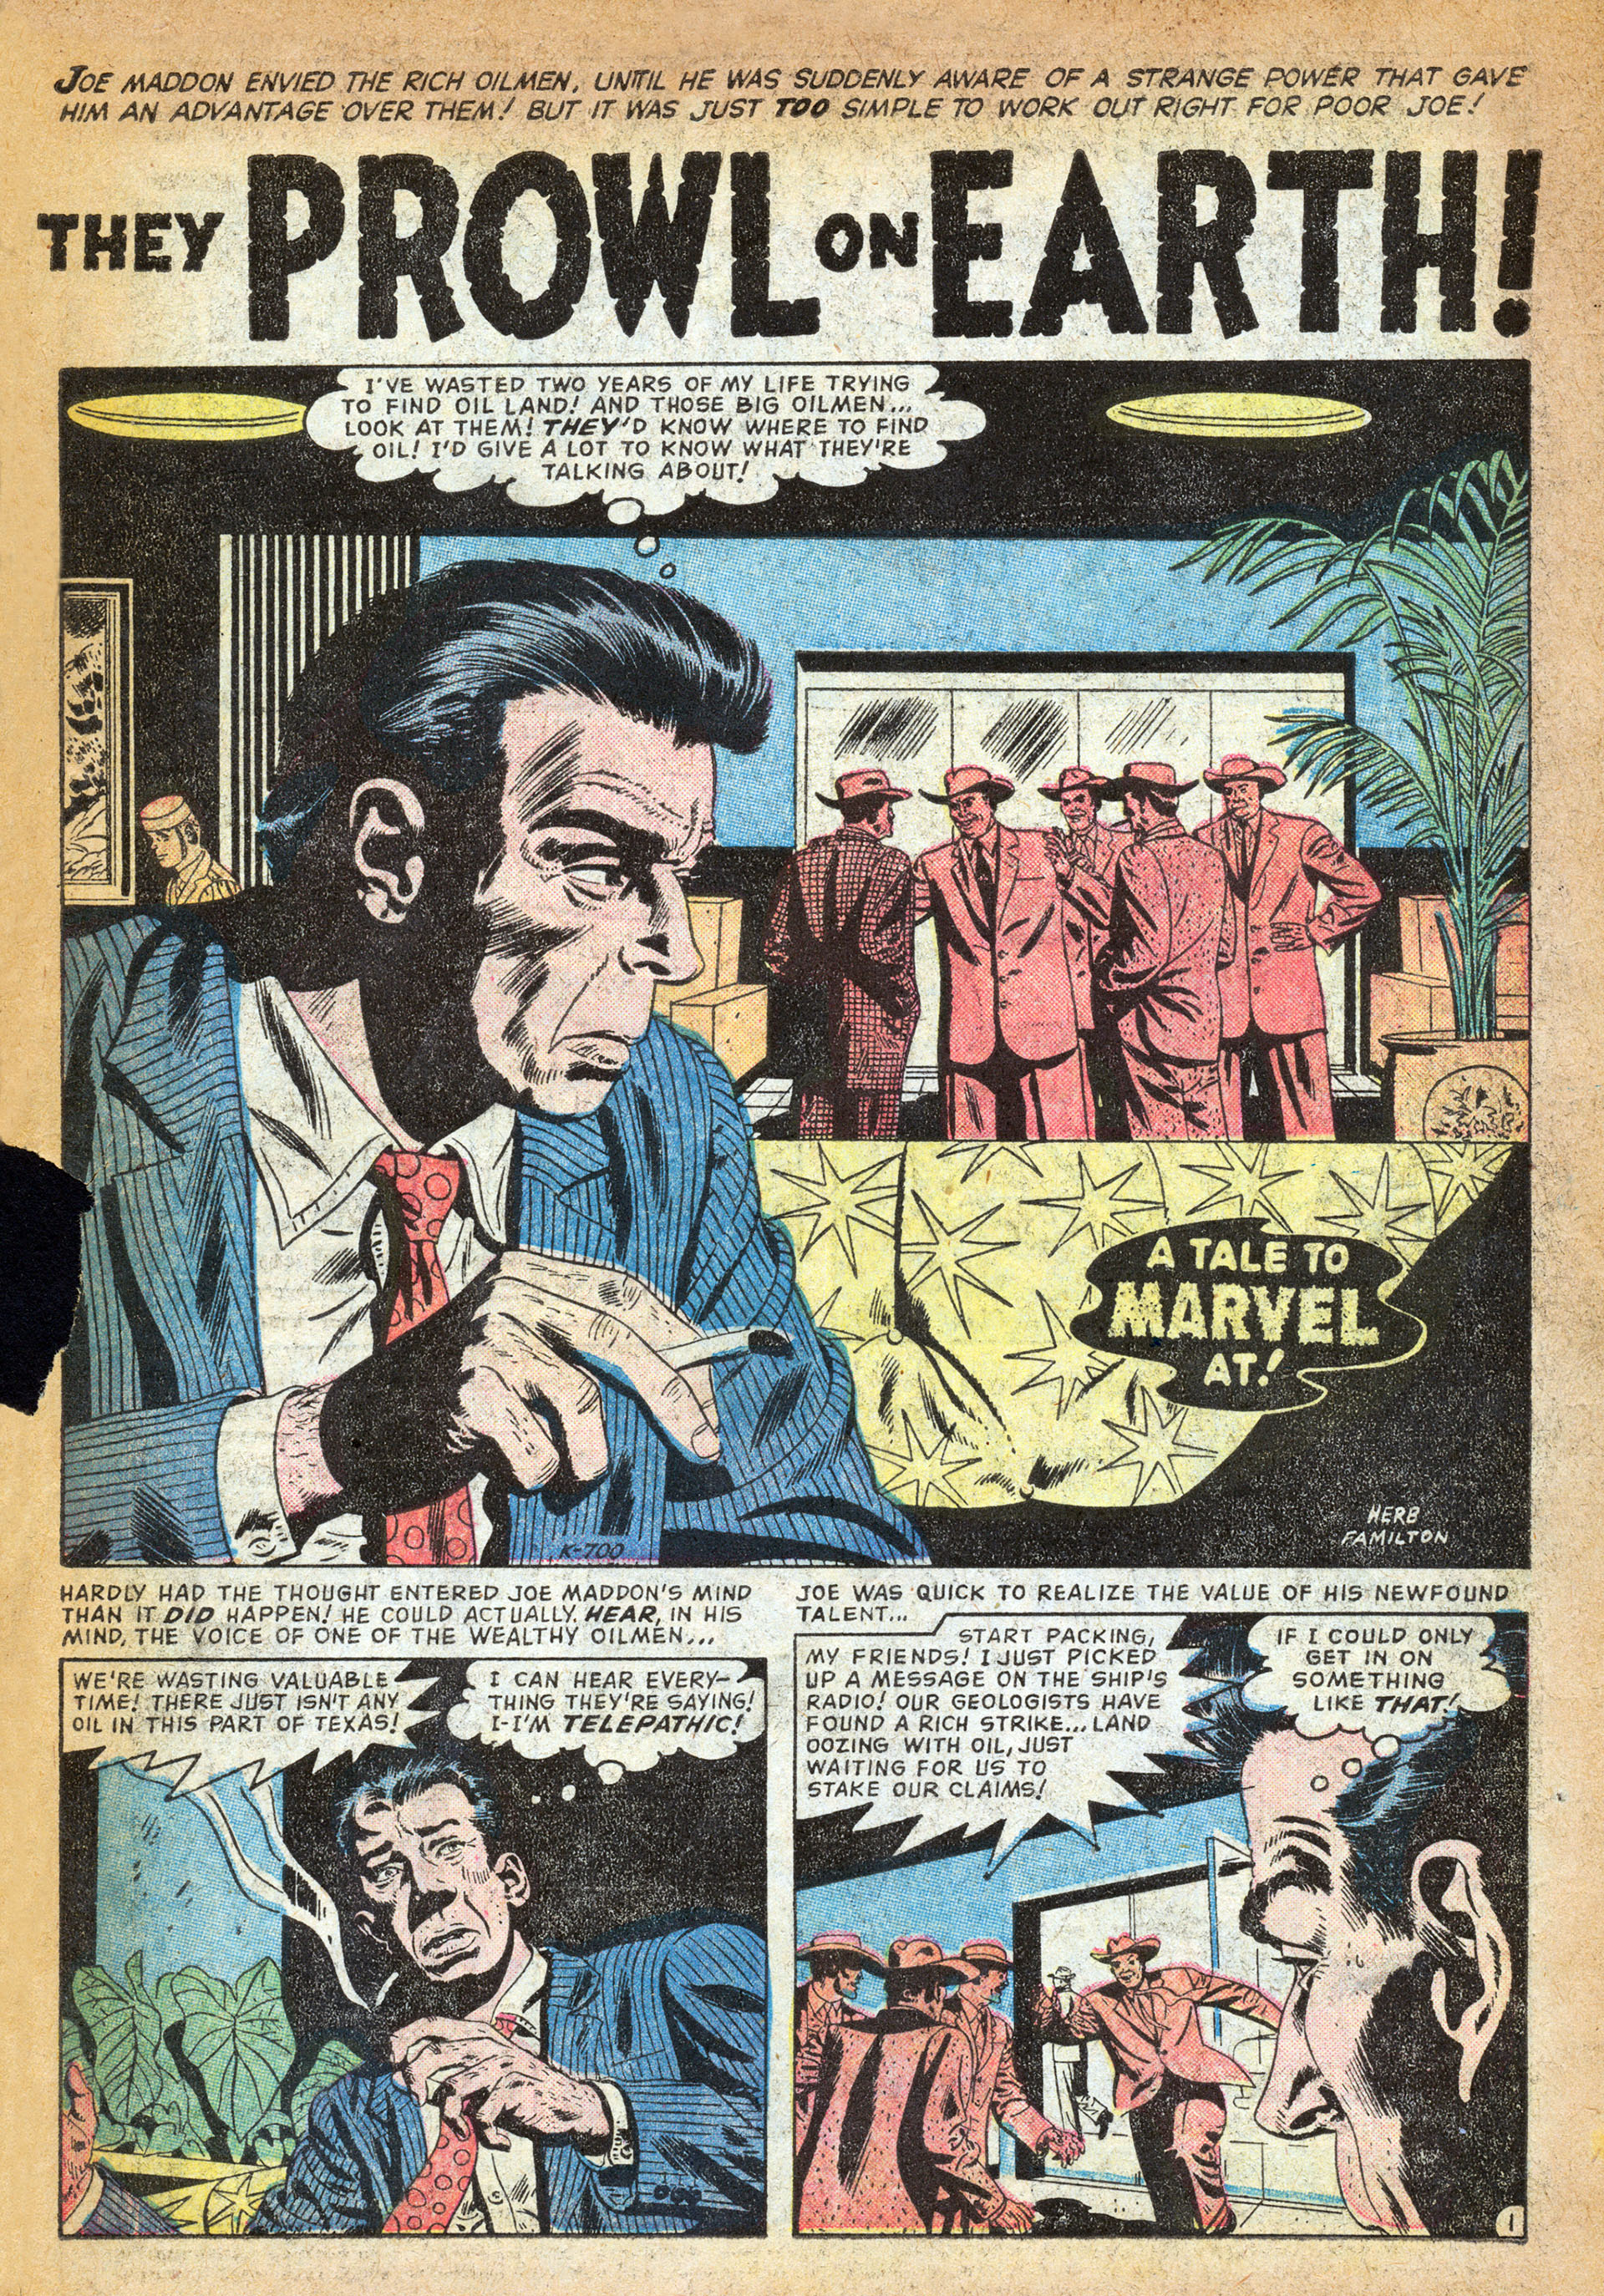 Marvel Tales (1949) 153 Page 2